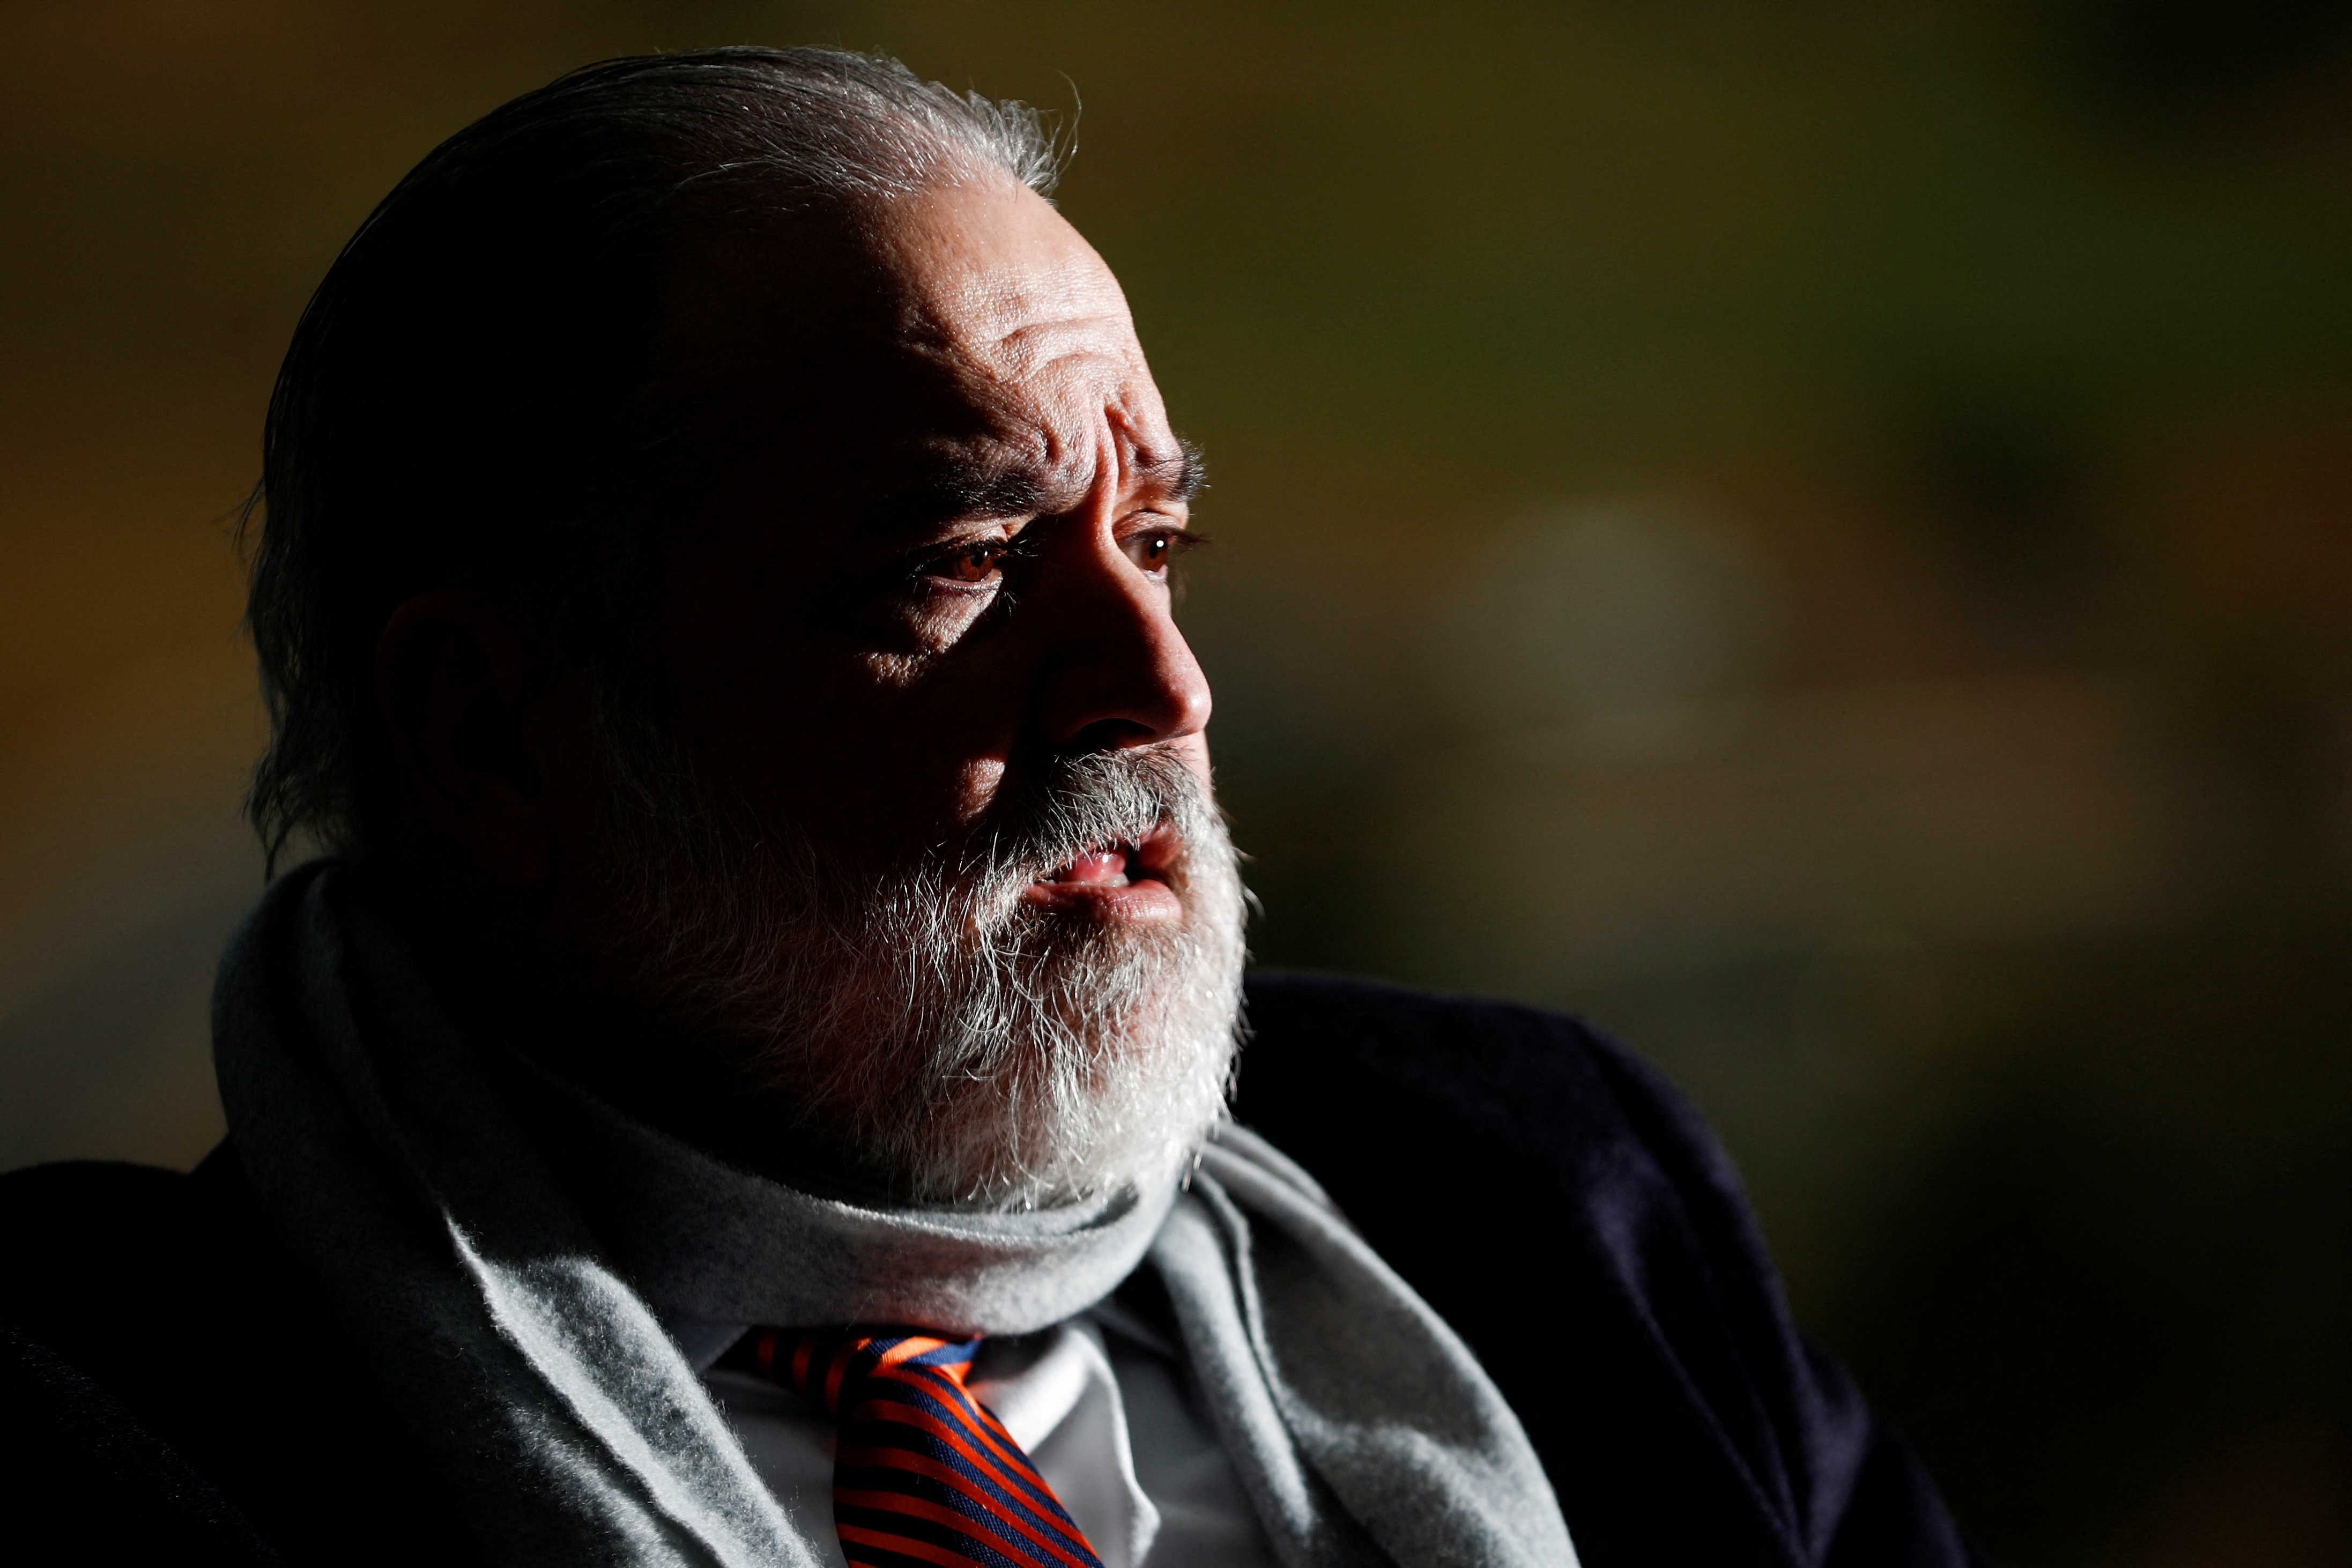 Brazil's Prosecutor-General Augusto Aras attends an interview with Reuters